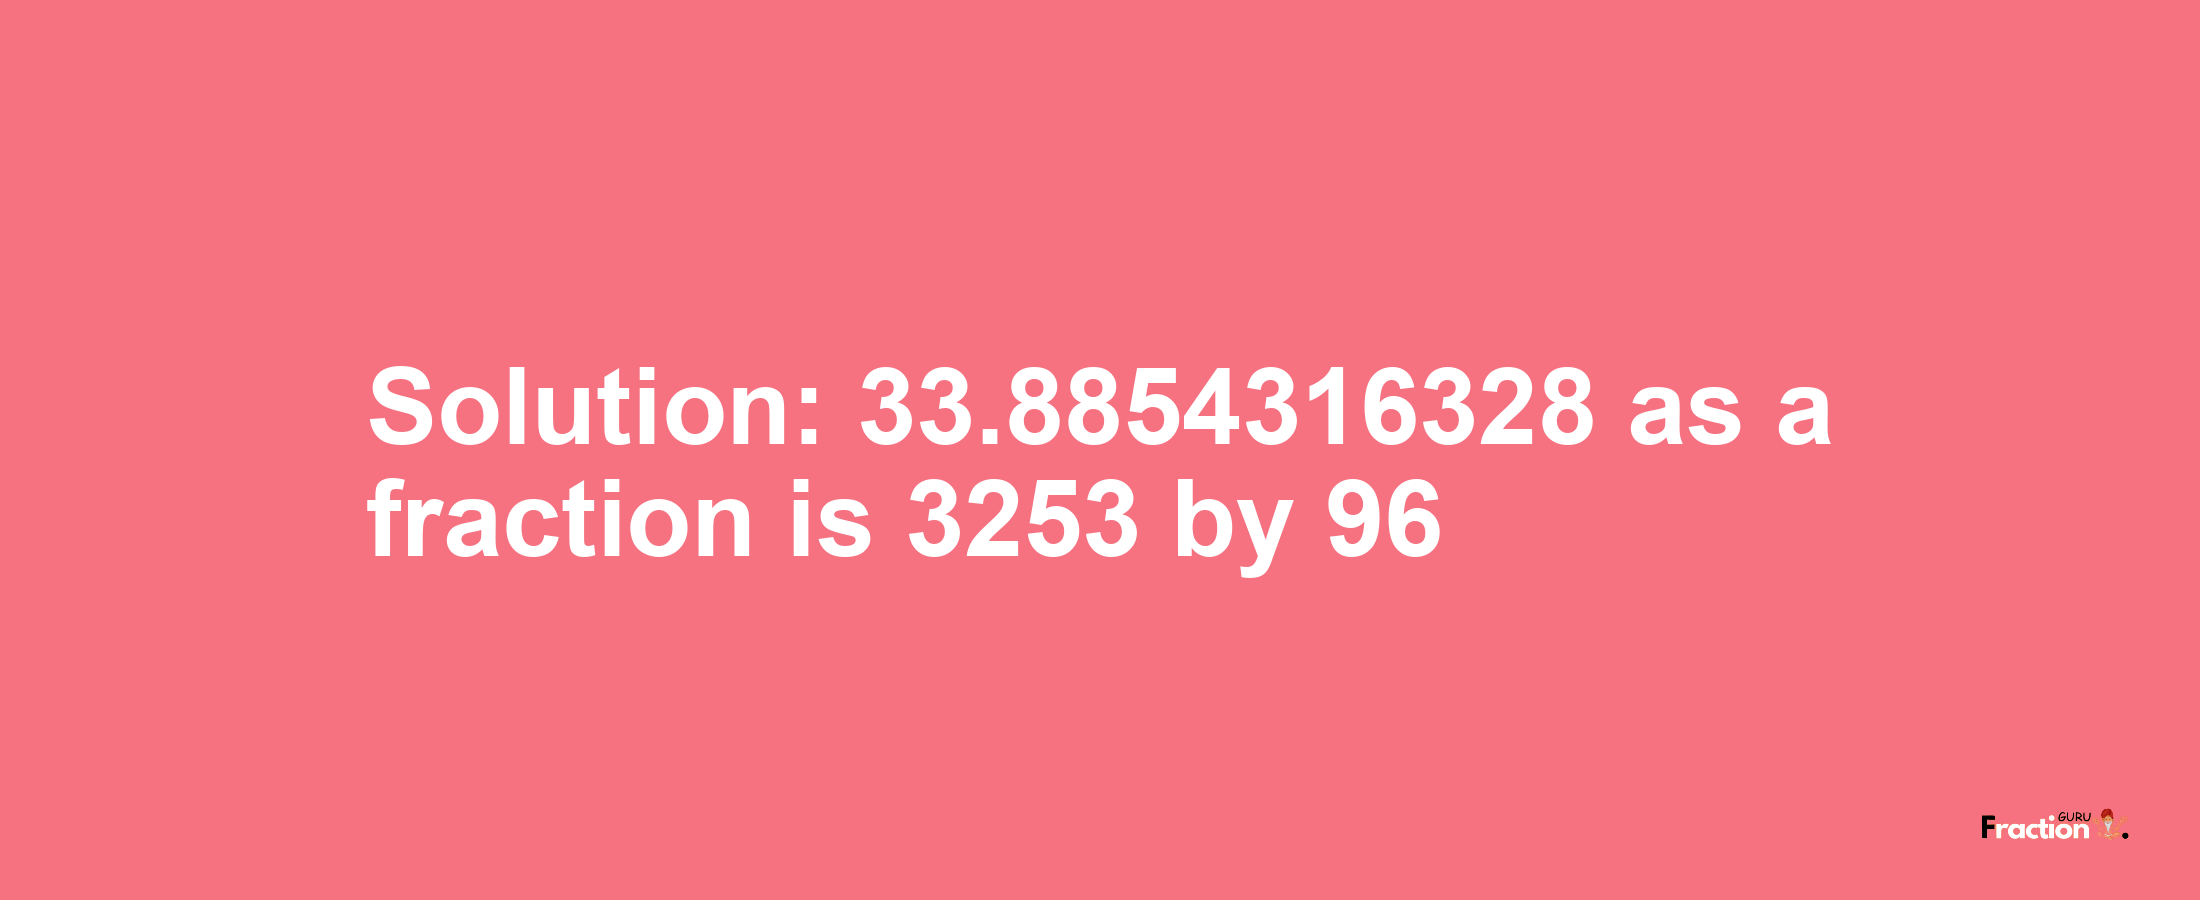 Solution:33.8854316328 as a fraction is 3253/96